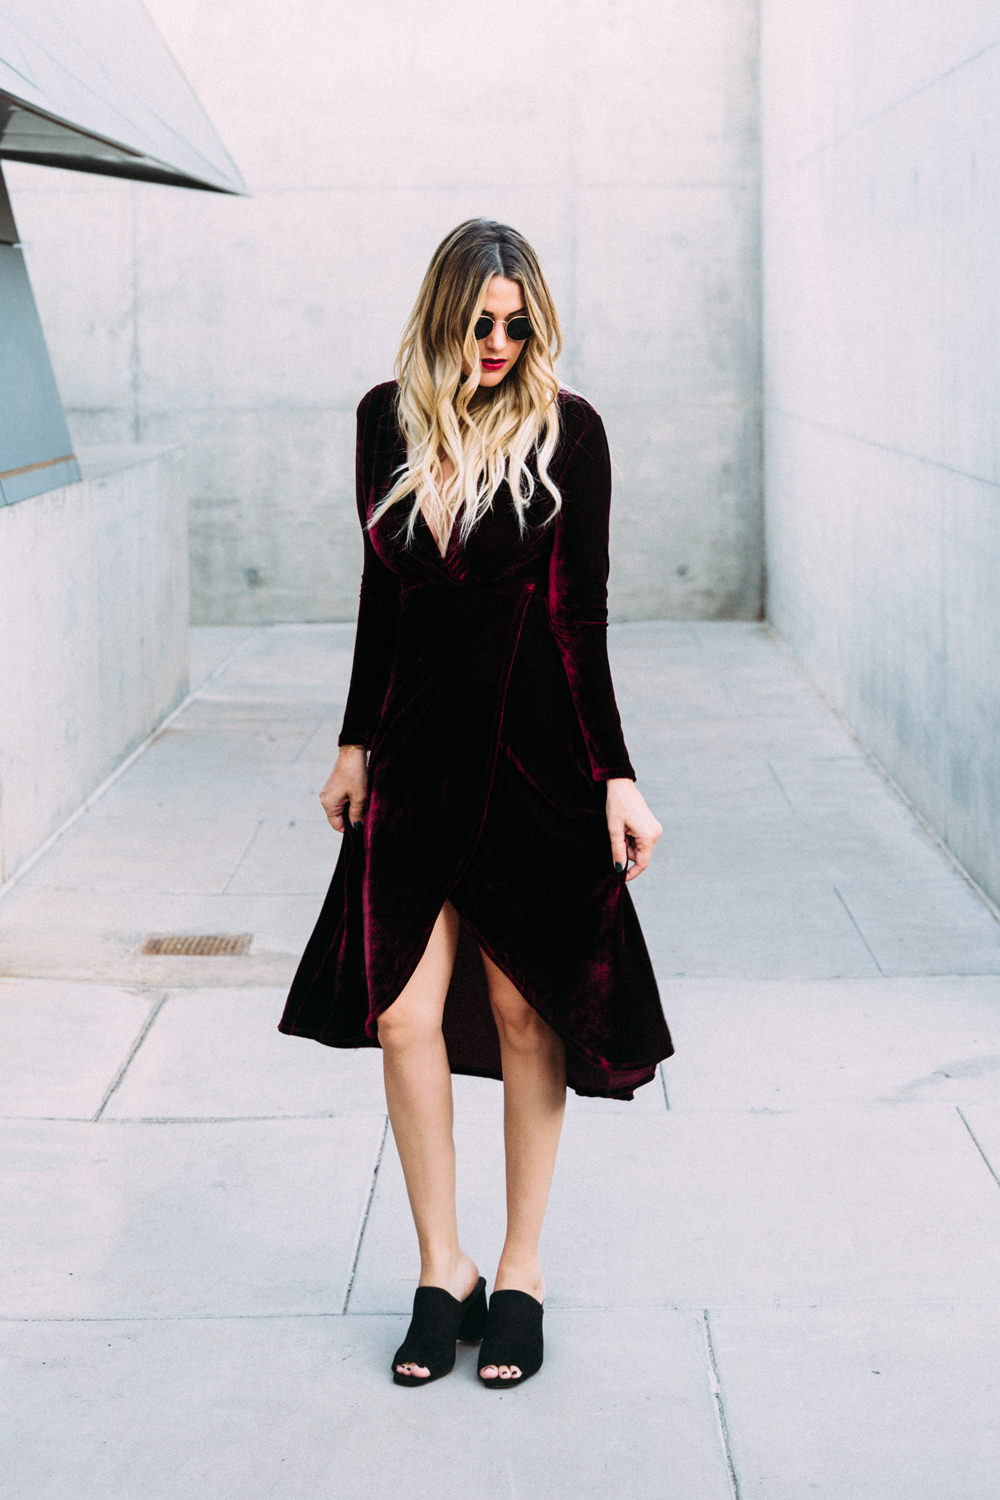 Caitlin Lindquist of the fashion blog Dash of Darling shares her favorite affordable holiday party dresses from Lulus.